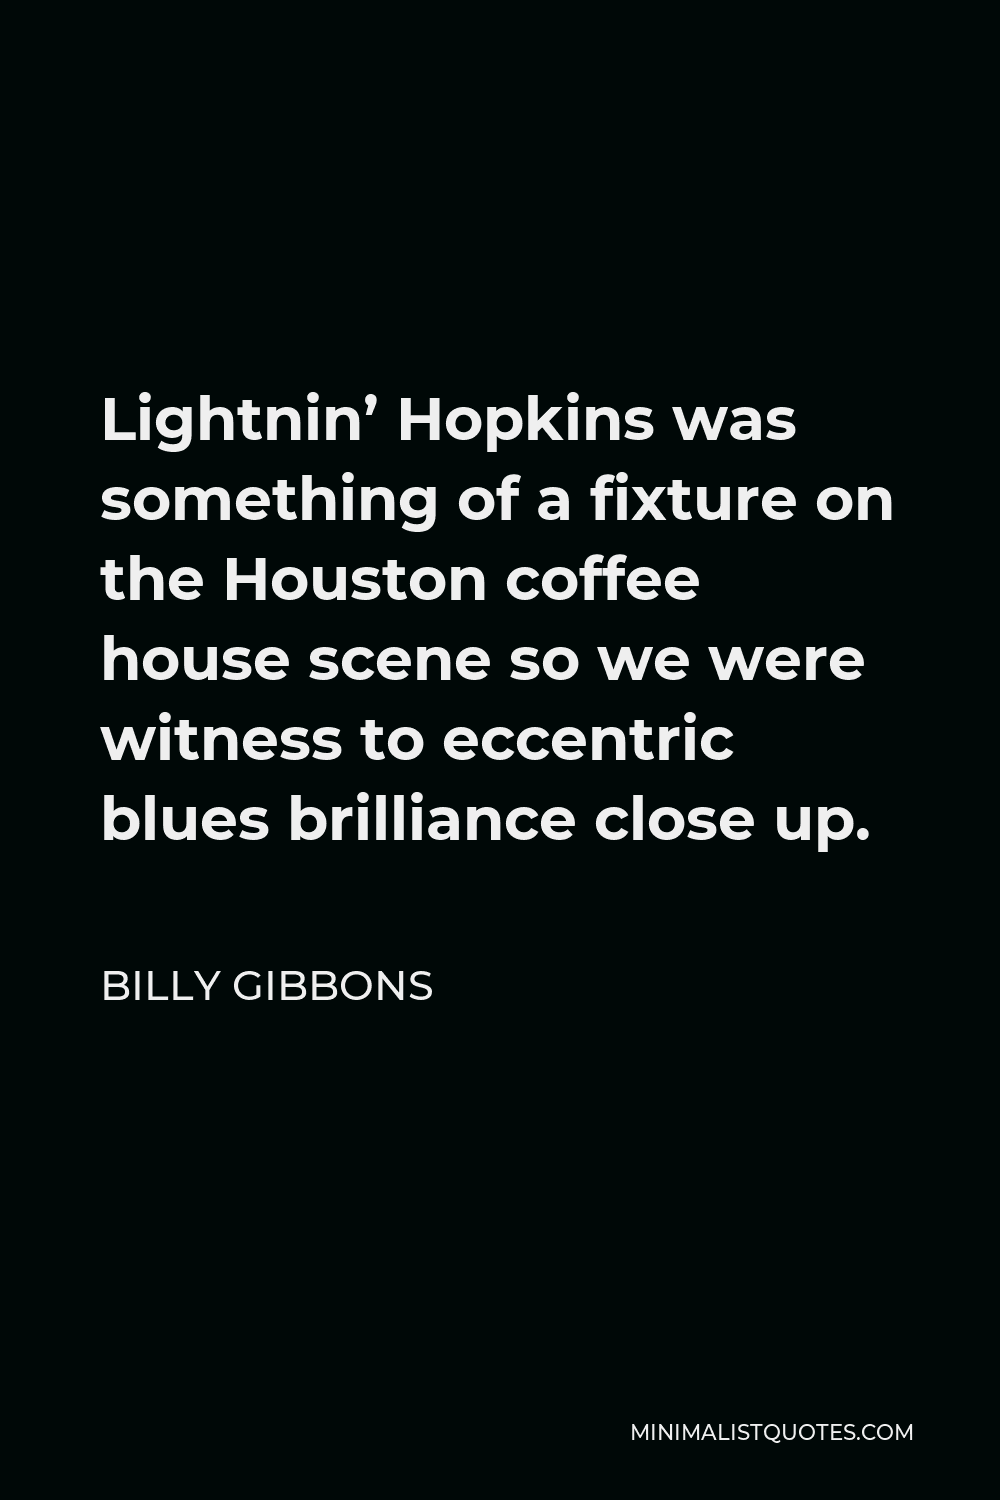 Billy Gibbons Quote - Lightnin’ Hopkins was something of a fixture on the Houston coffee house scene so we were witness to eccentric blues brilliance close up.